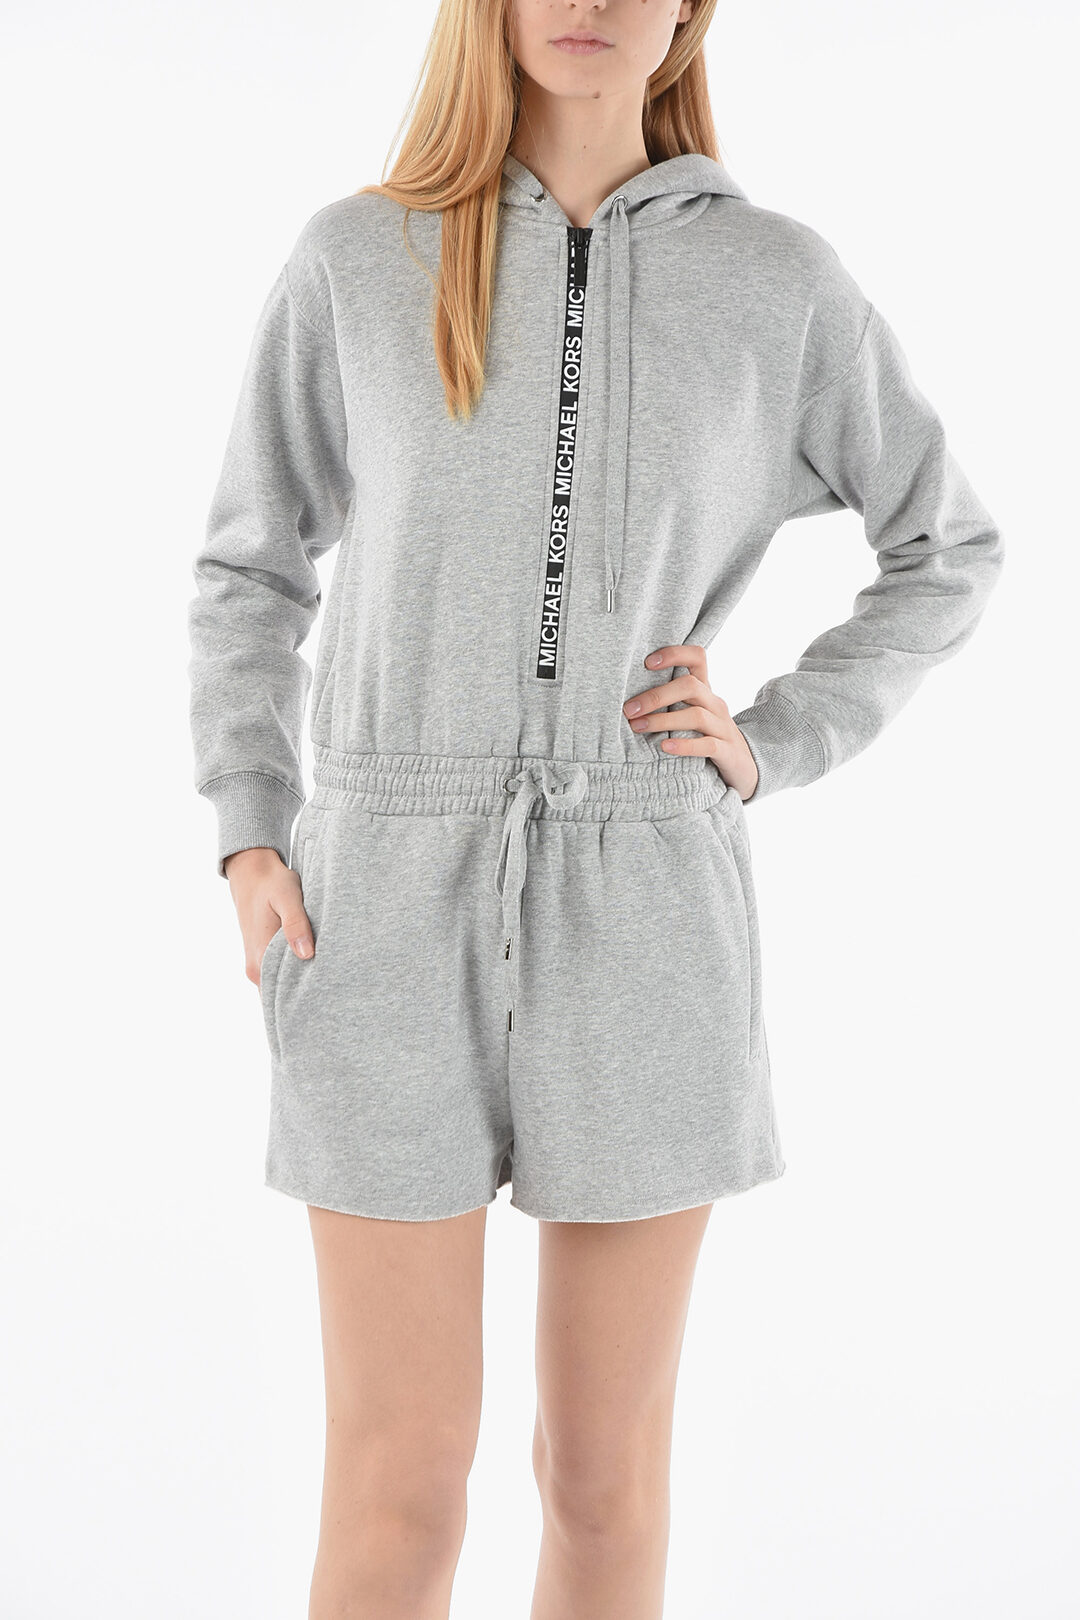 Michael Kors Fleeced Cotton Romper Suit with Hood women - Glamood Outlet